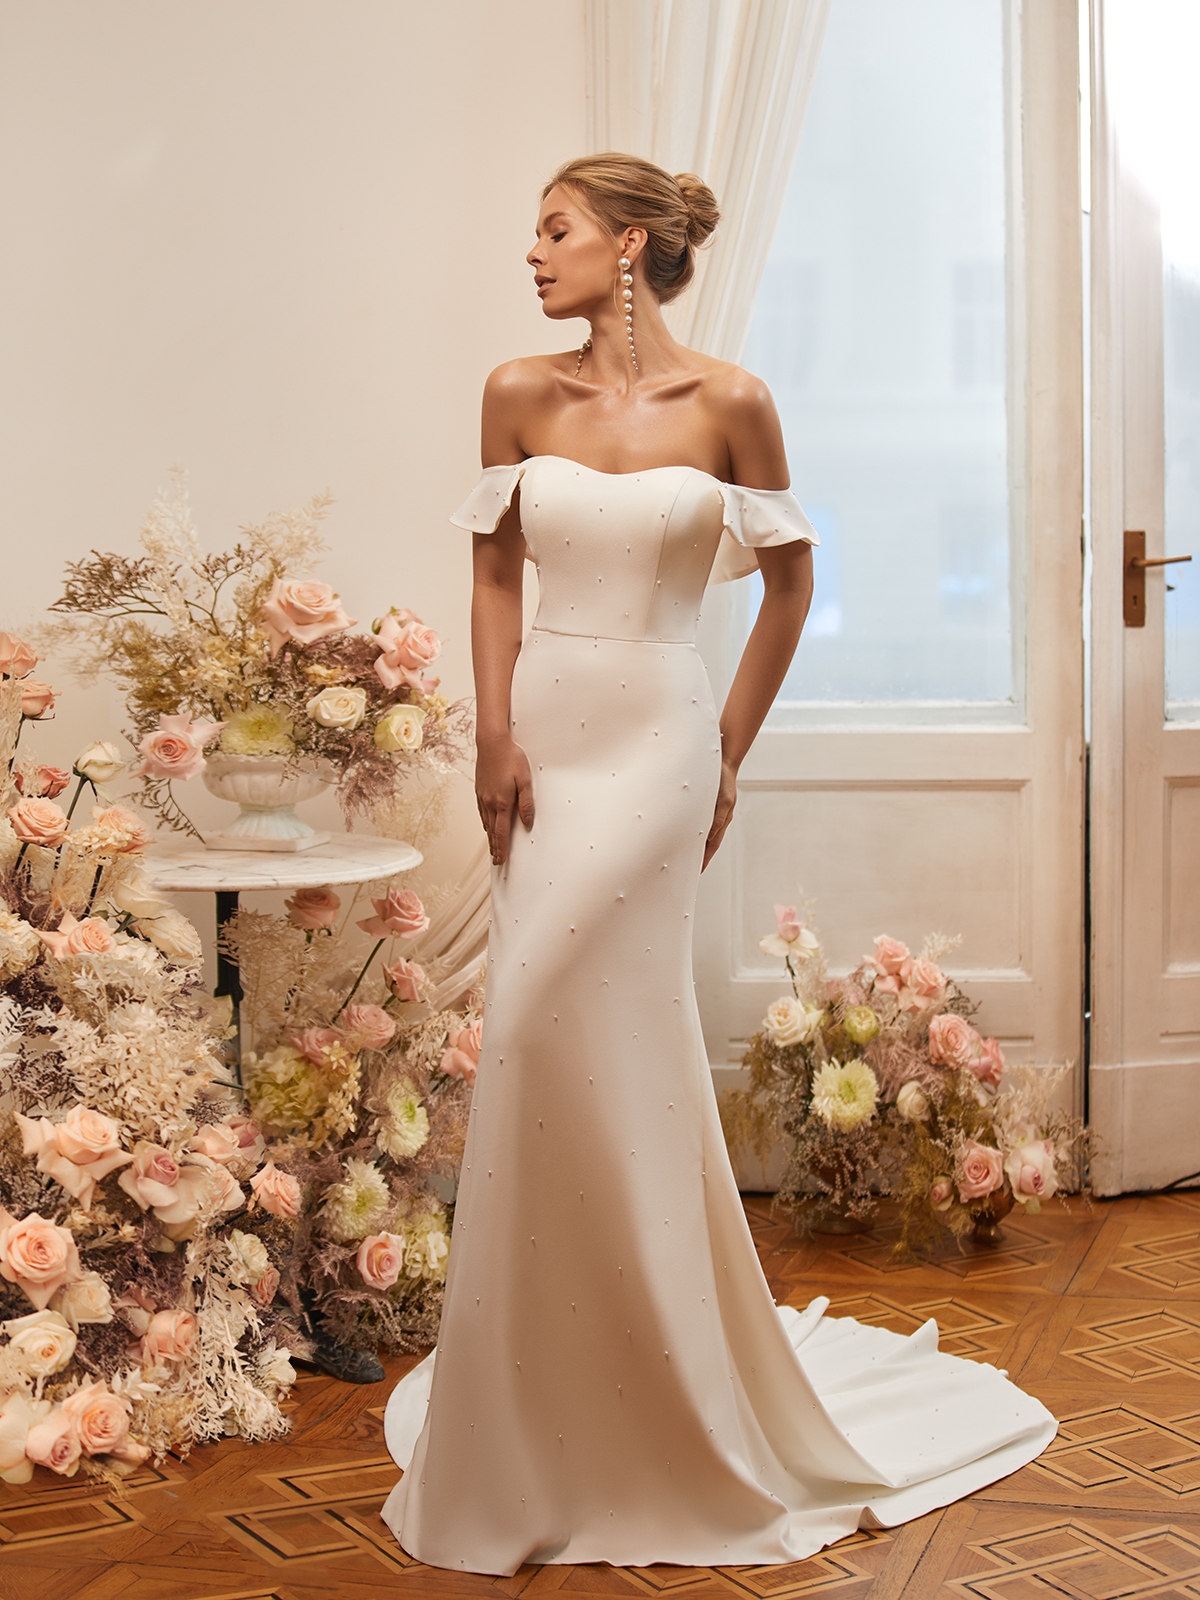 Bride standing in front of flower arrangements in a romantic crepe wedding gown with pearls placed all over